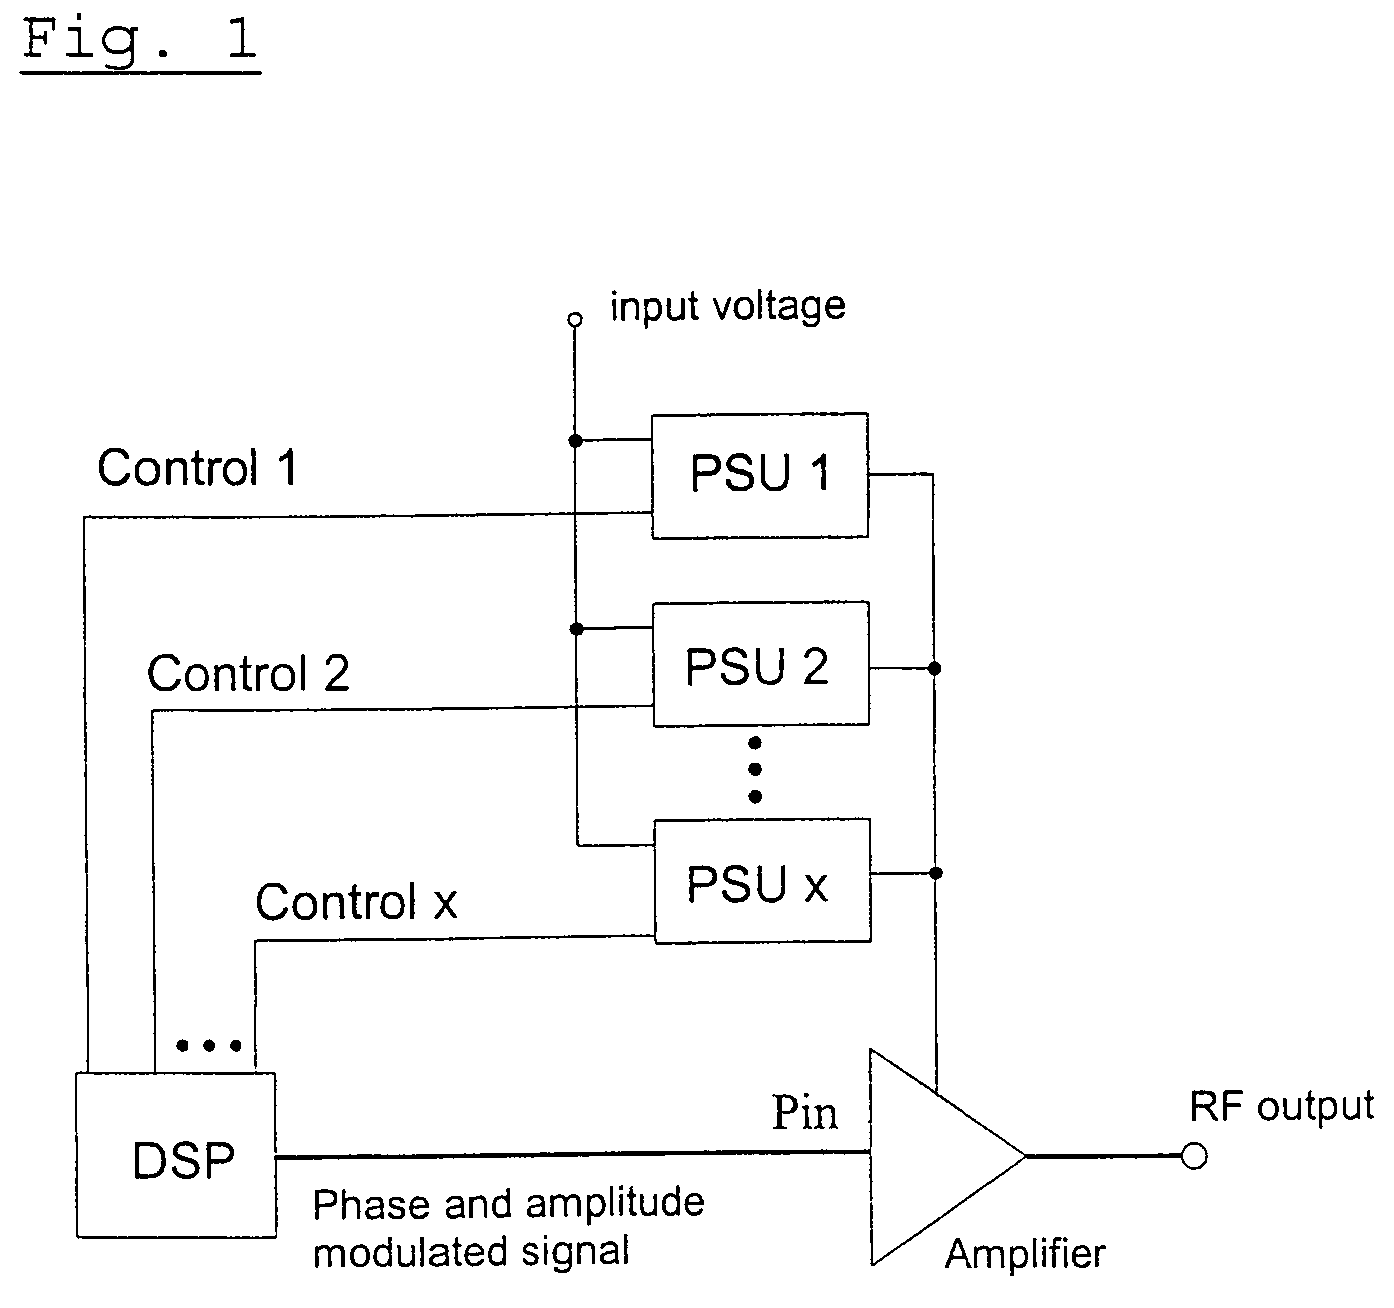 Power amplification by using different fixed power supply signals for the amplifier